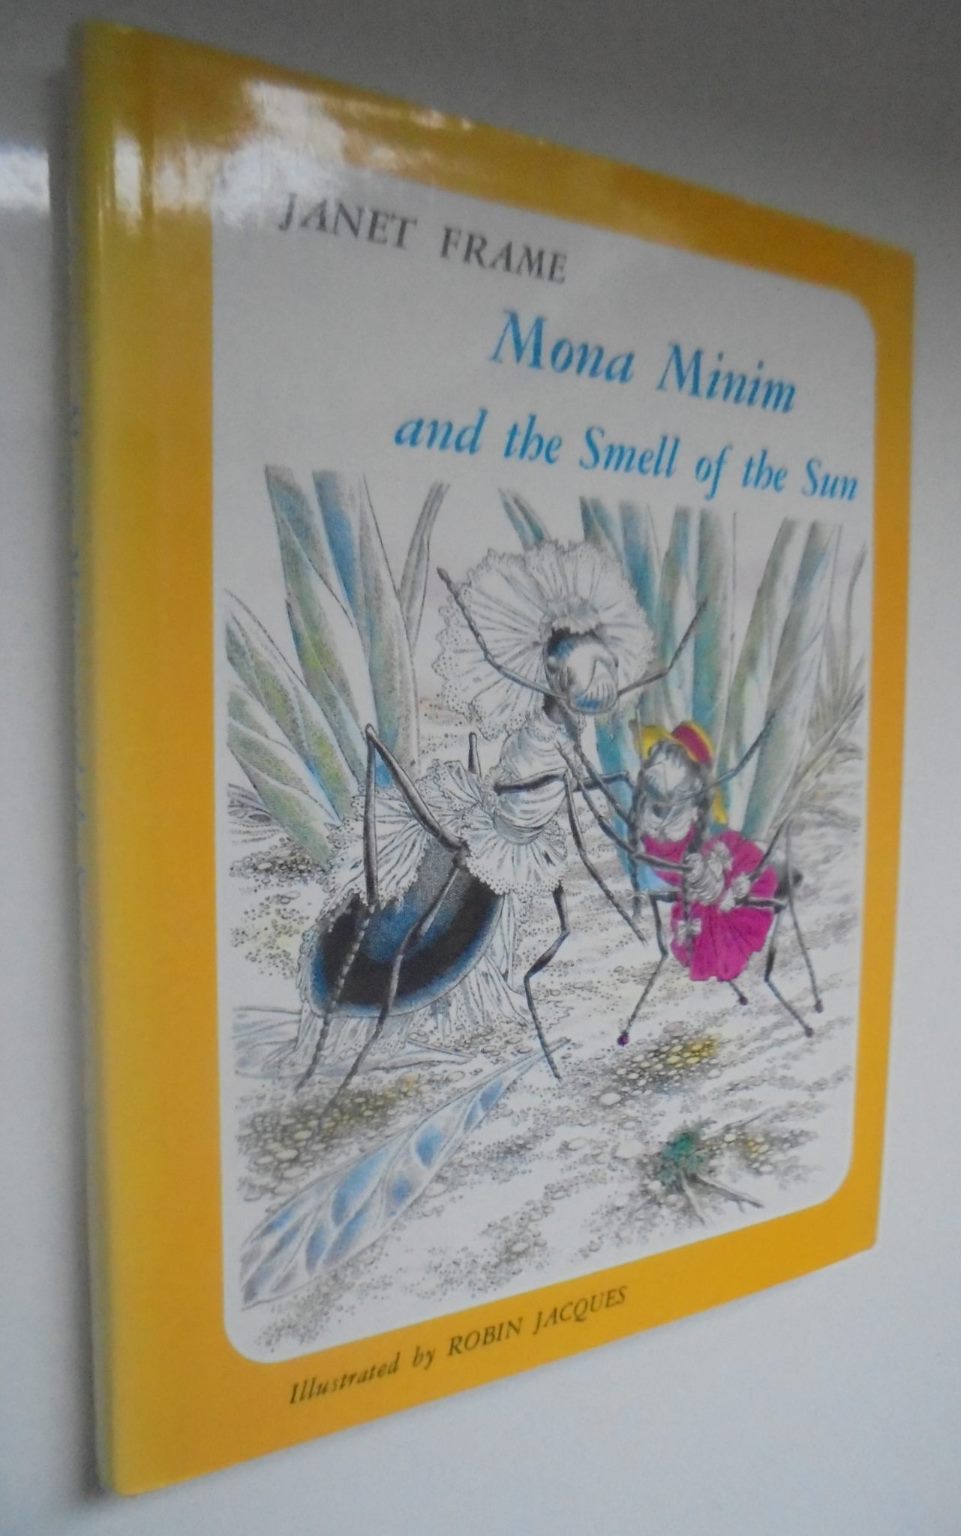 Mona Minim and the Smell of the Sun By Janet Frame, Robin Jacques (Illustrated by).